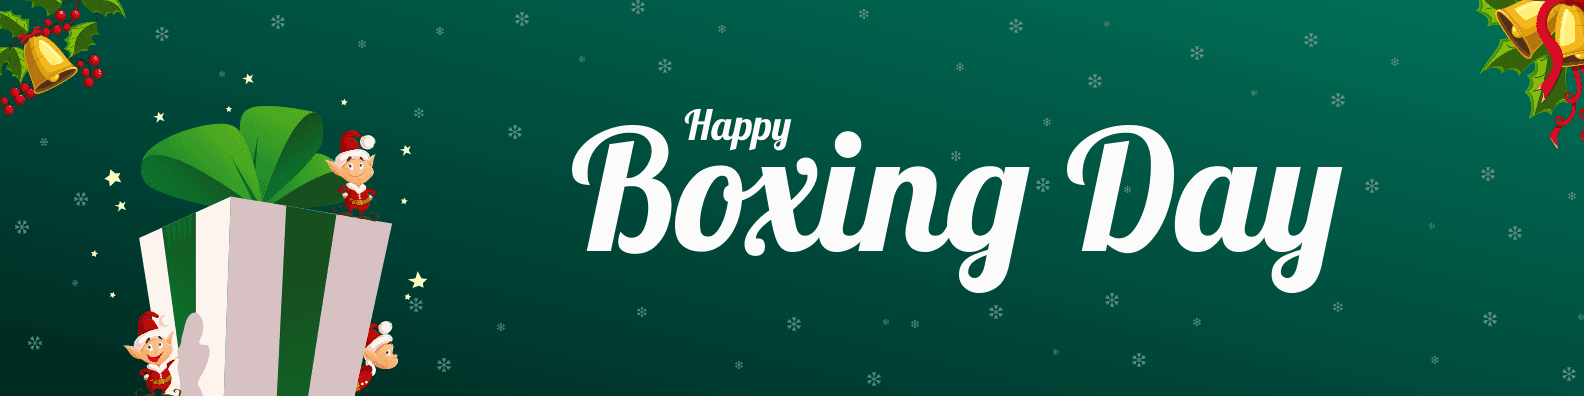 green-background-happy-boxing-day-linkedin-banner-template-thumbnail-img